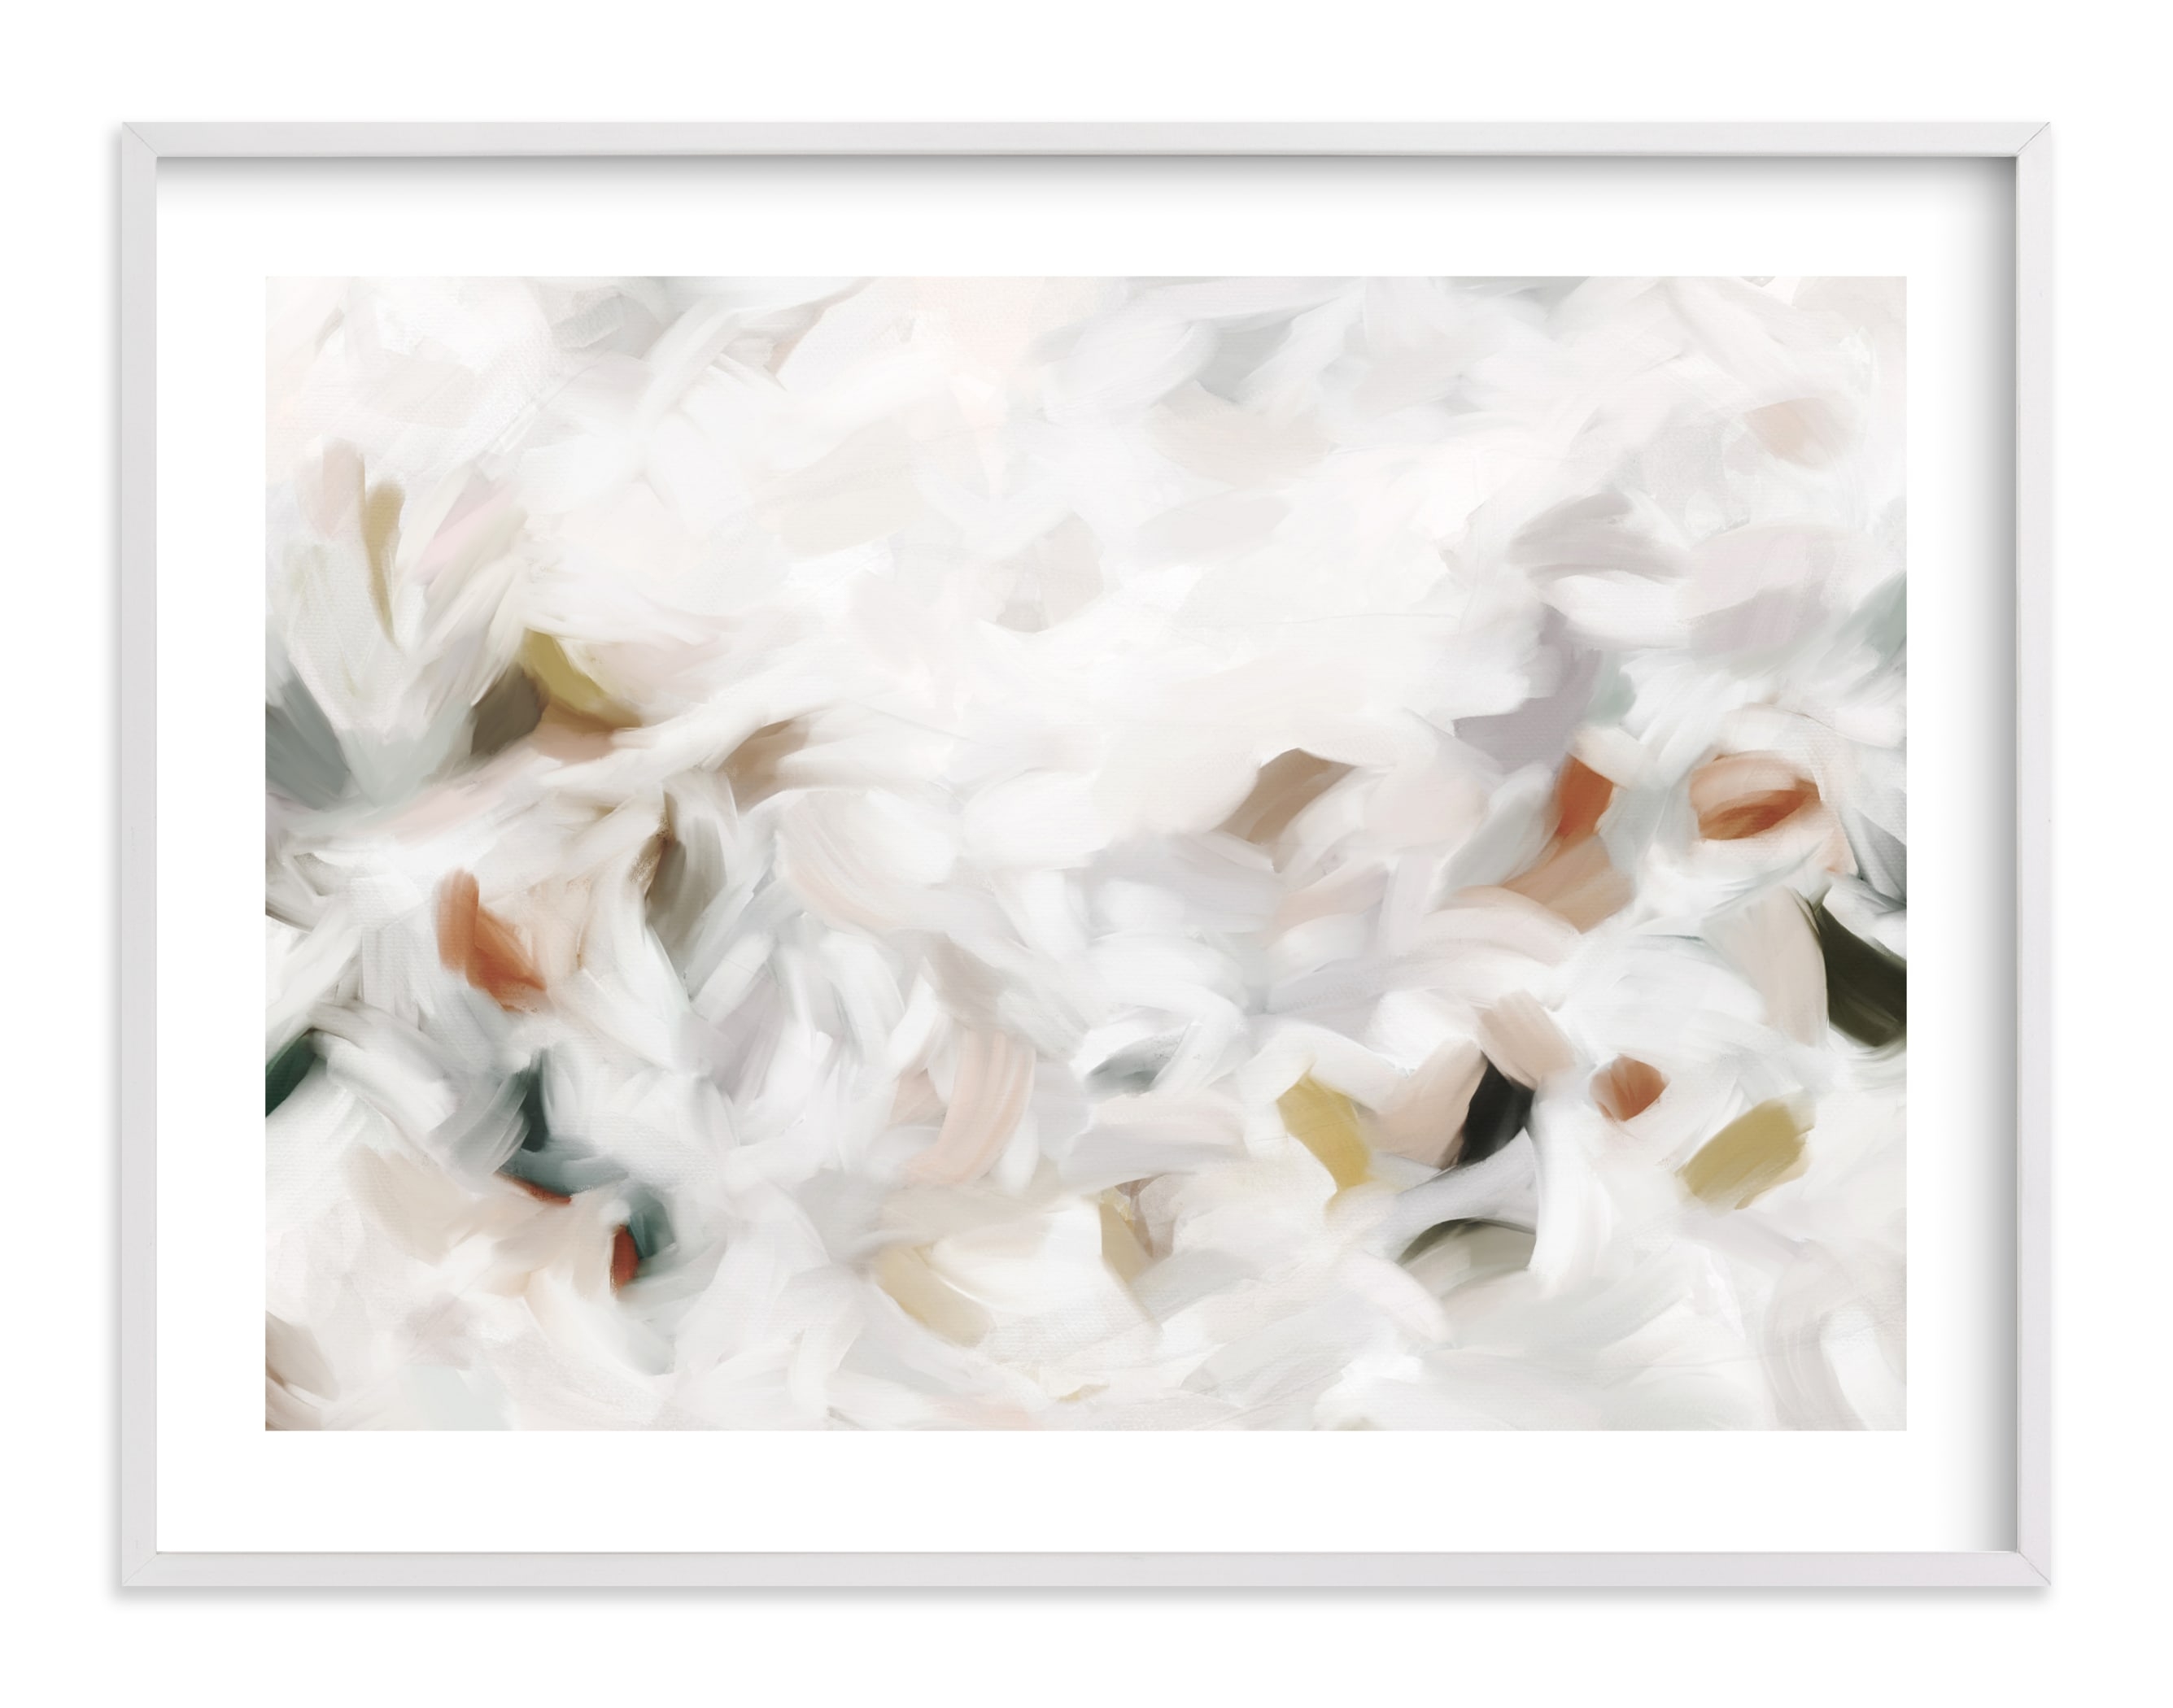 Custom Ethereal Composition by Melanie Severin with White Border & White Wood Frame - 40"x30" - Image 0